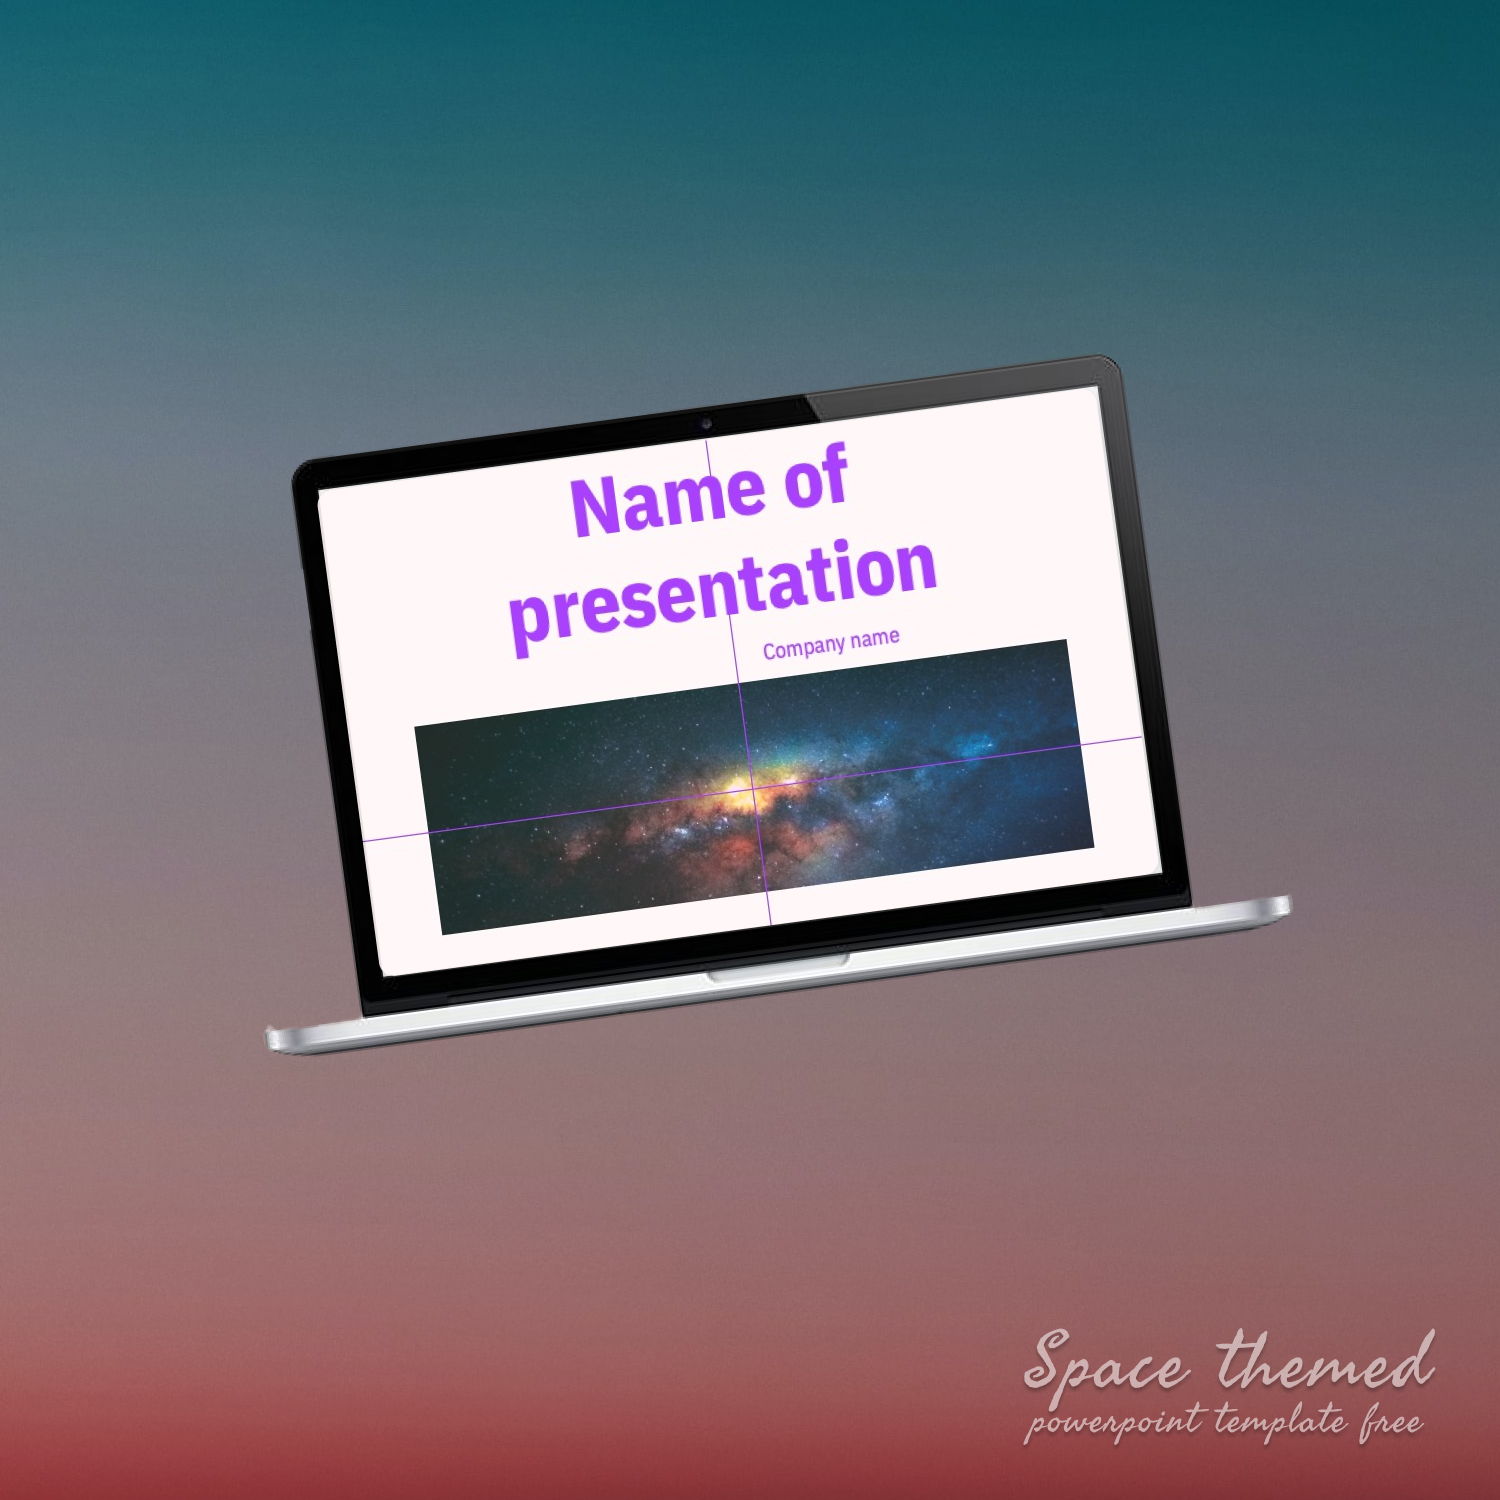 Space themed powerpoint template on laptop.